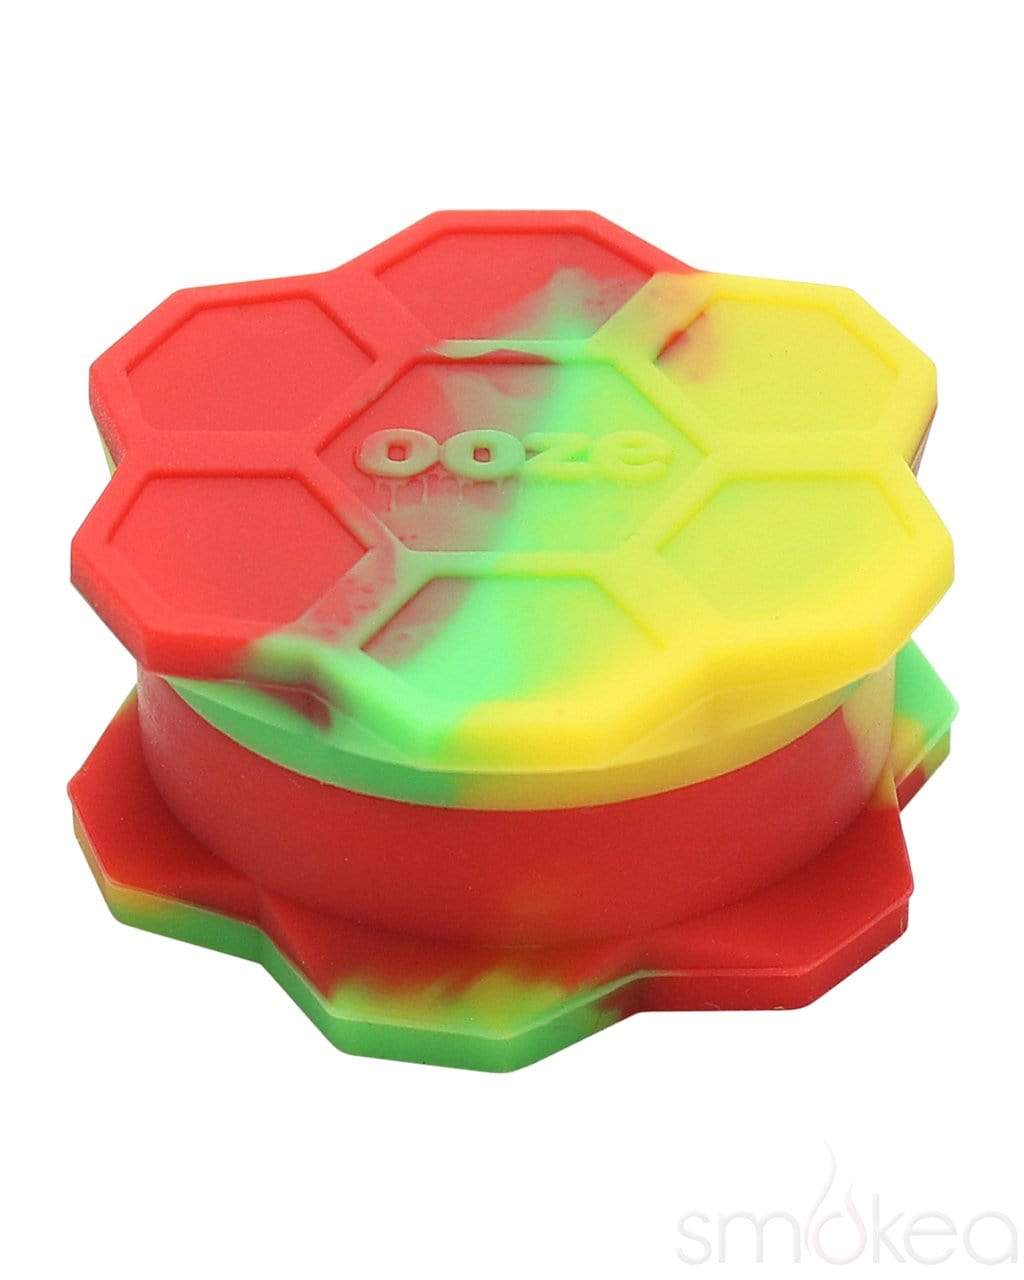 3ML Silicone Wax Oil Stash Jar Portable Smoking Non Stick Round Multicolor  Concentrate Oil Storage Case Containers Dabs Rig Dry Herb Box From  Bloomingsky, $0.29